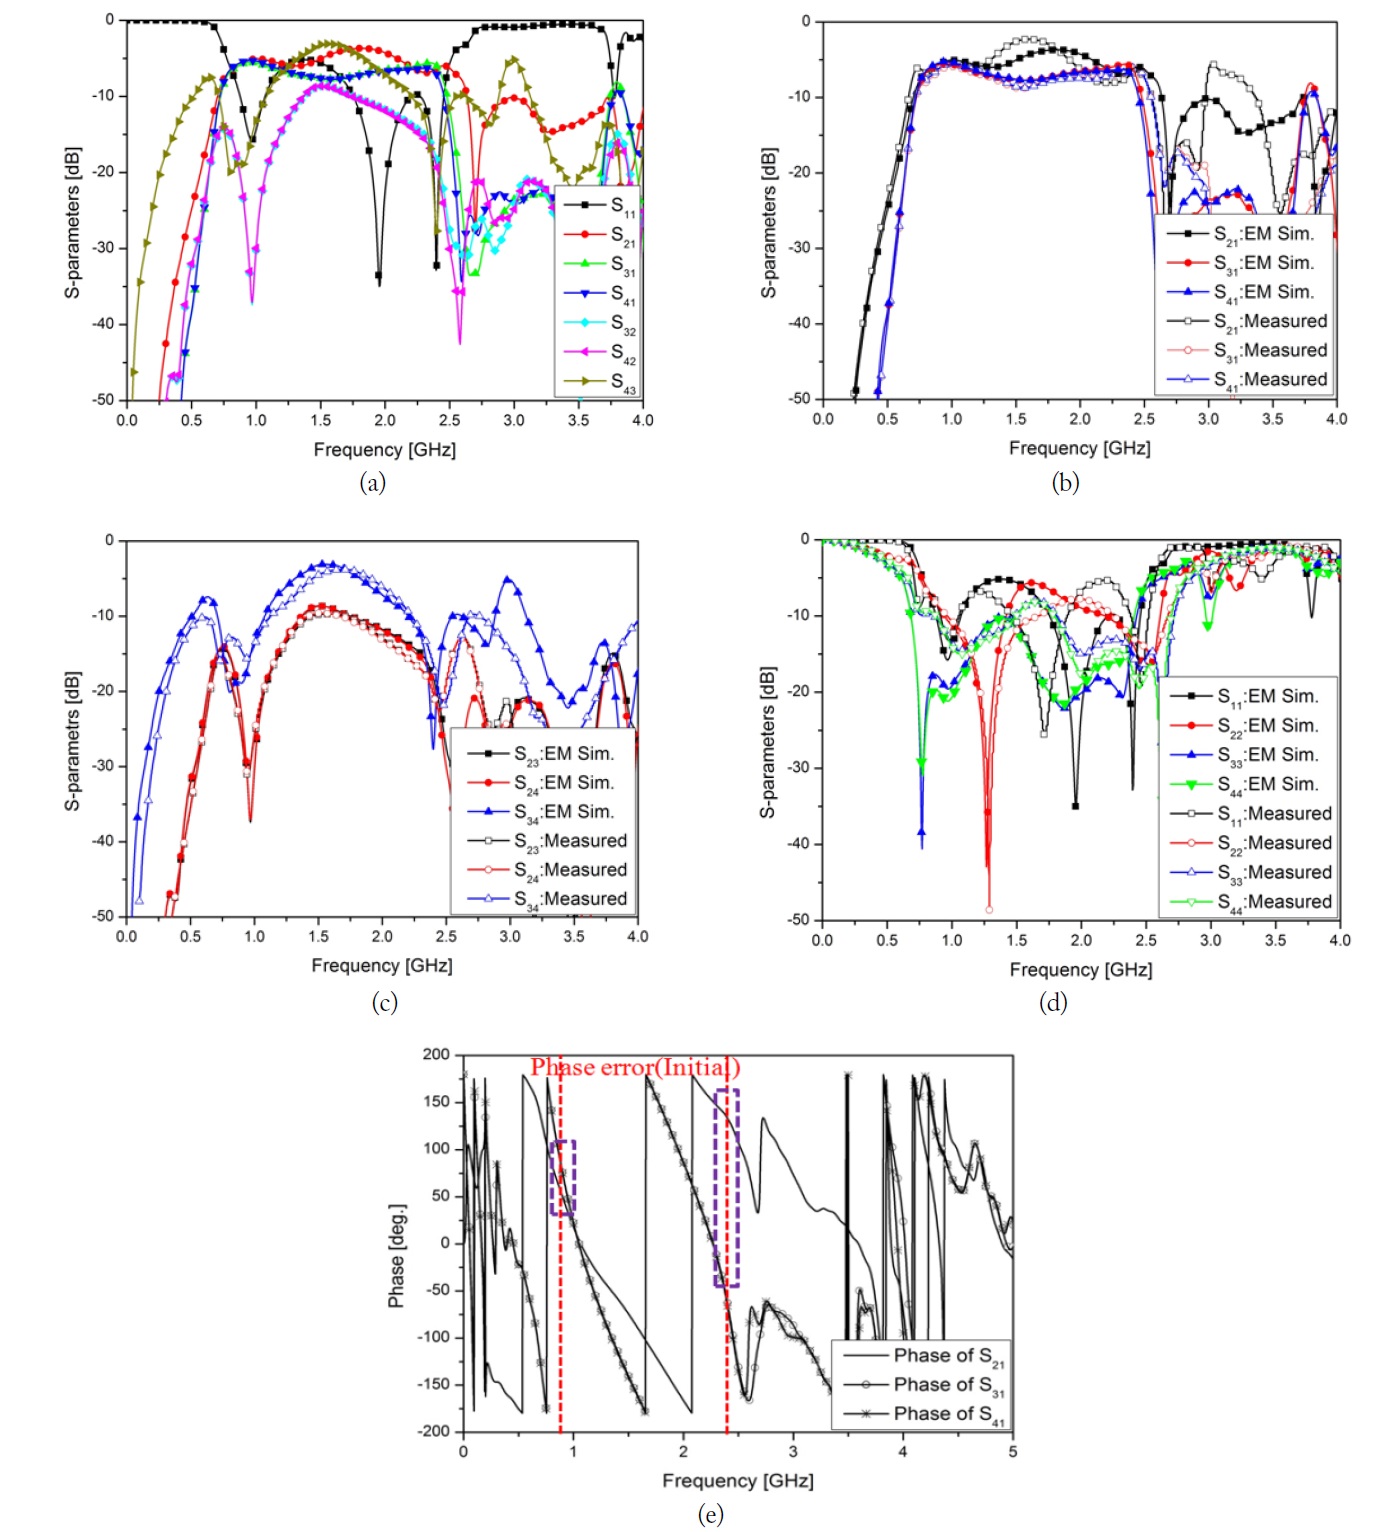 The full-wave simulated and measured results of the proposed dual-band compact three-way power divider. (a) S-parameters from the electromagnetic (EM) simulation, (b) power-division performances, (c) inter-port isolation performances, (d) reflection coefficients, and (e) phases at the outputs.